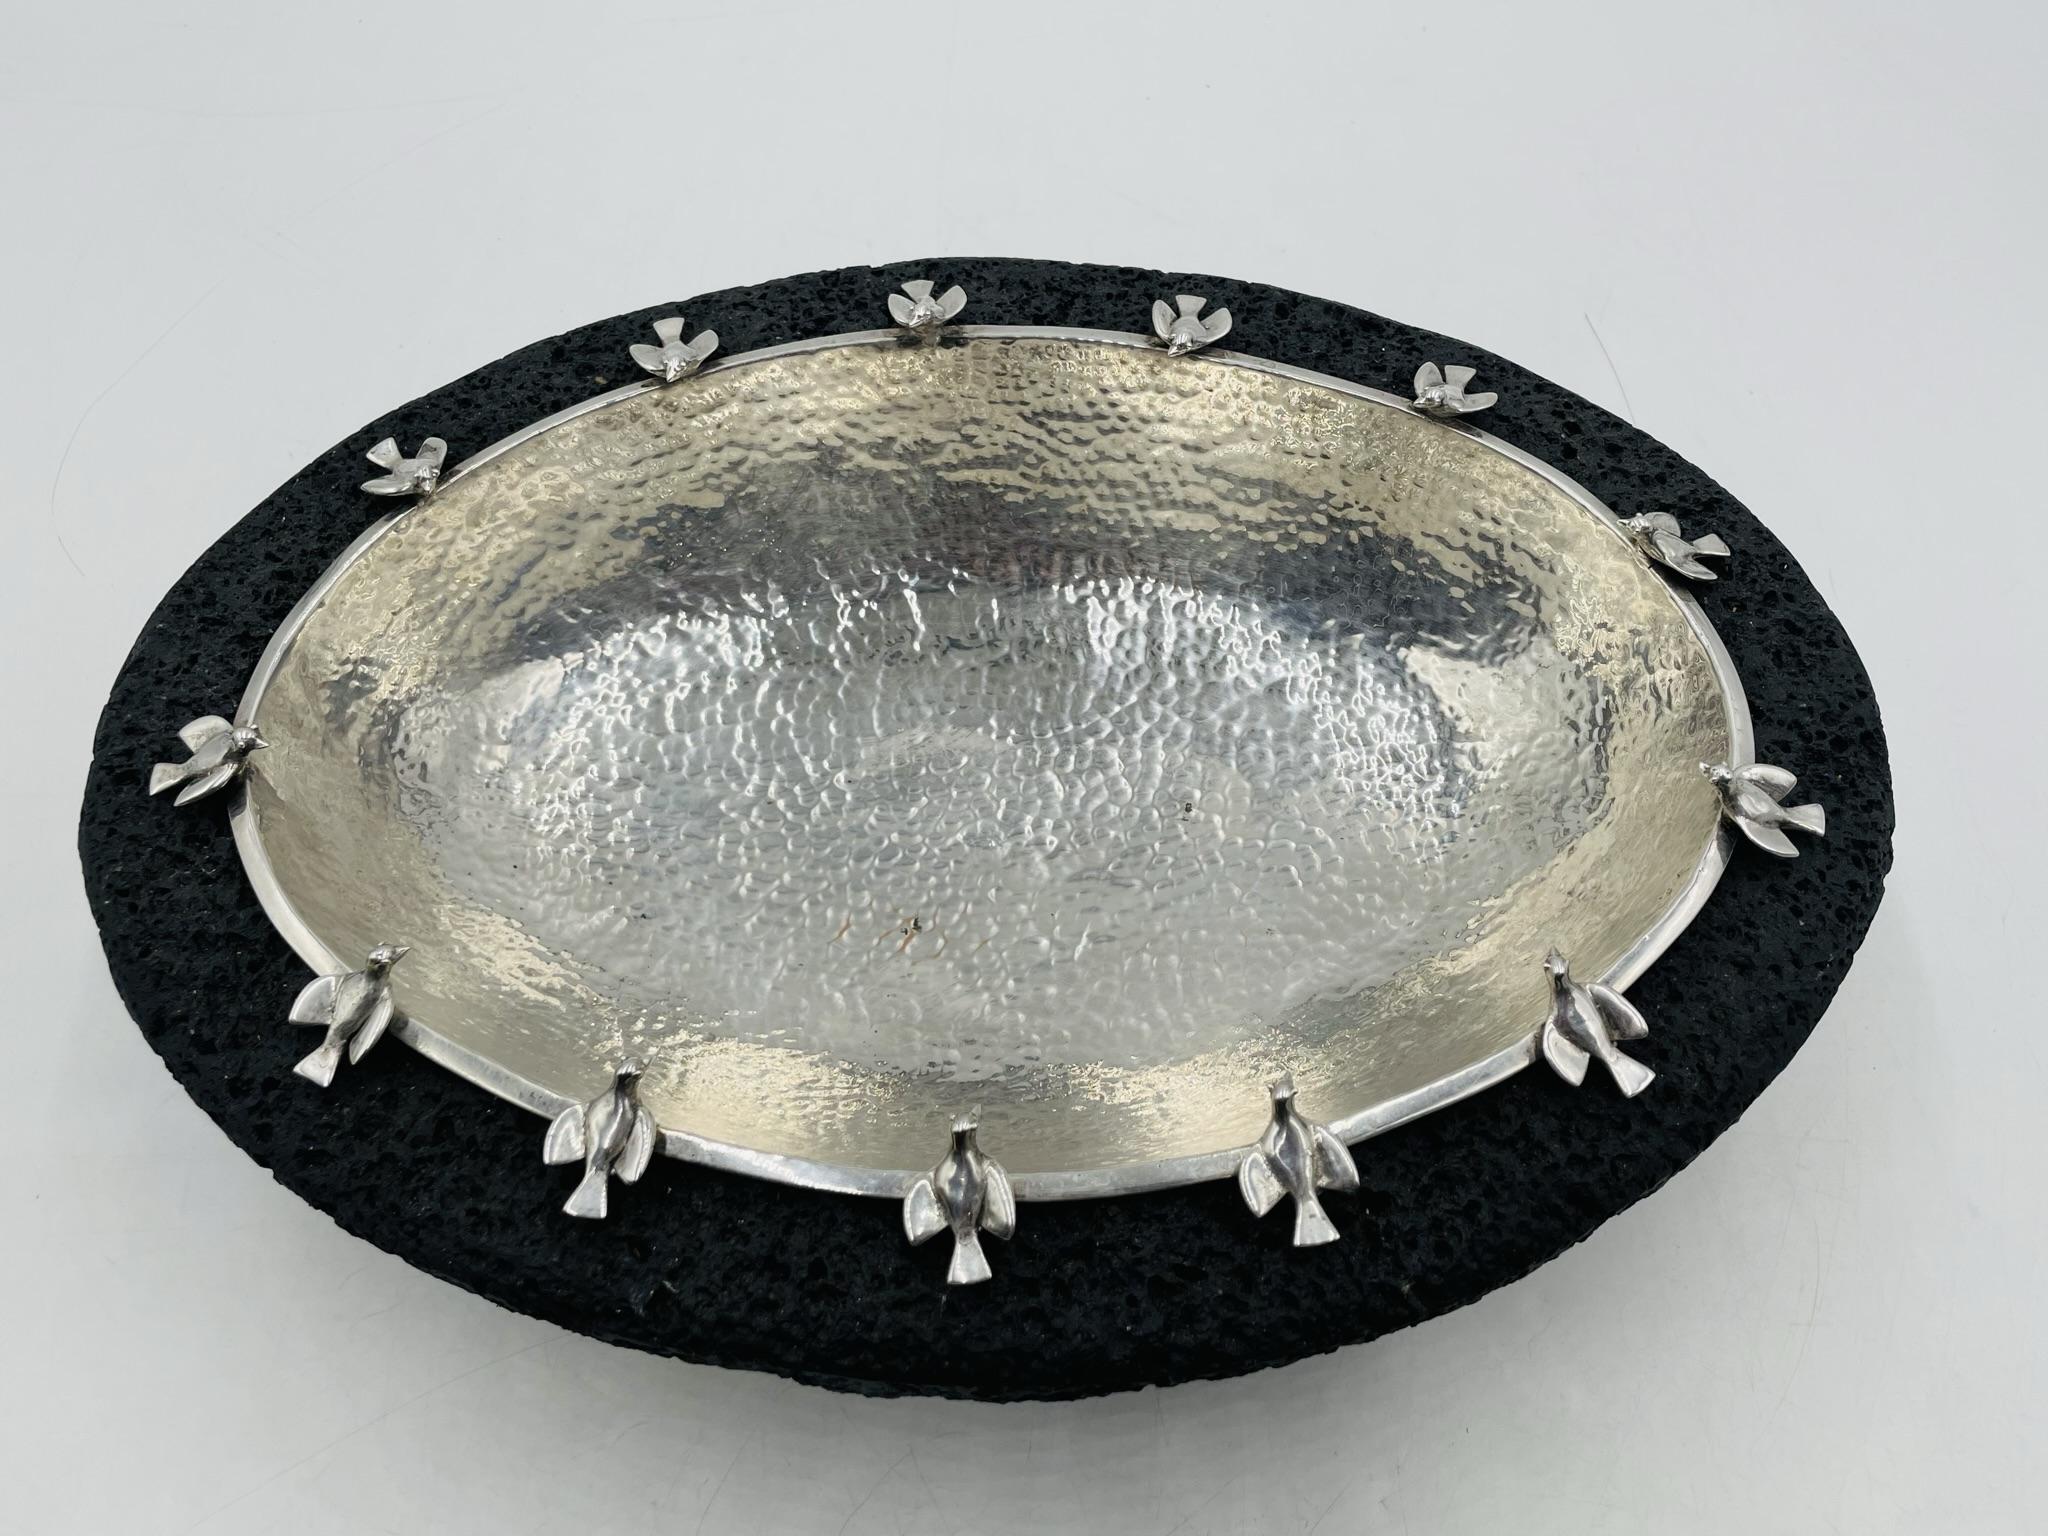 Modern Silver-Plate Bowl with Bird Detail on Volcanic Rock baseby Emilia Castillo For Sale